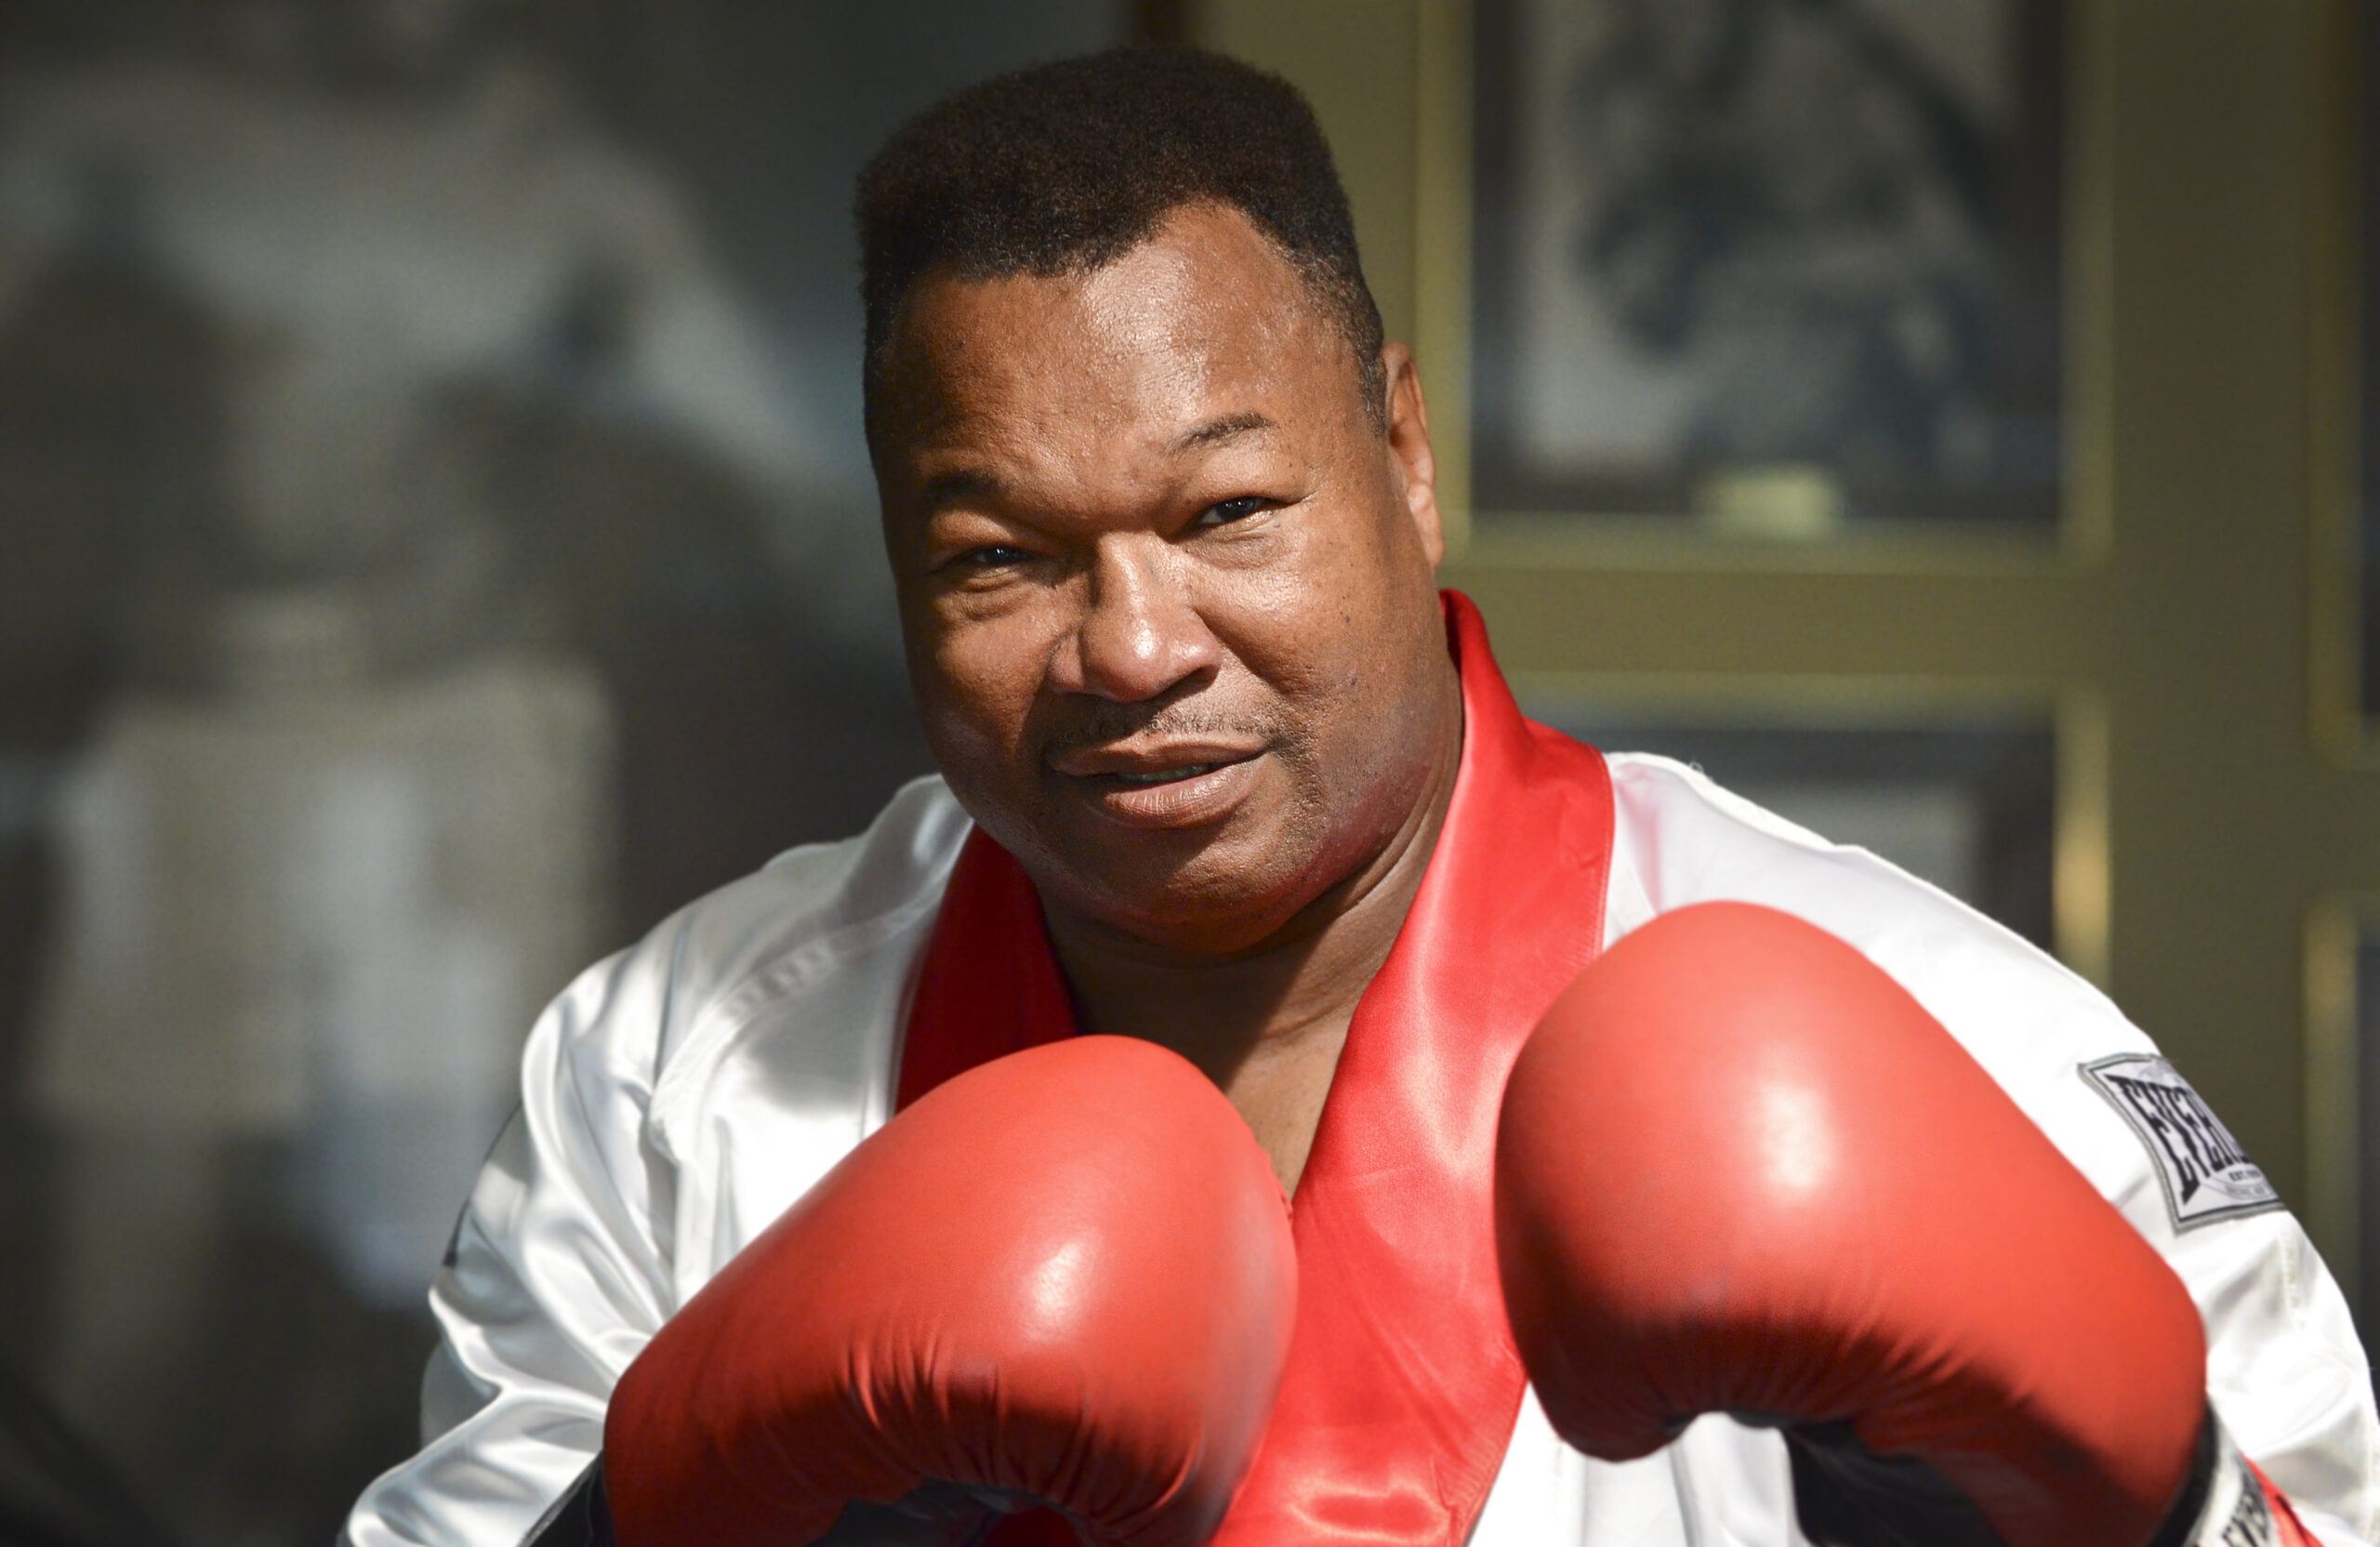 How rich is Larry Holmes?